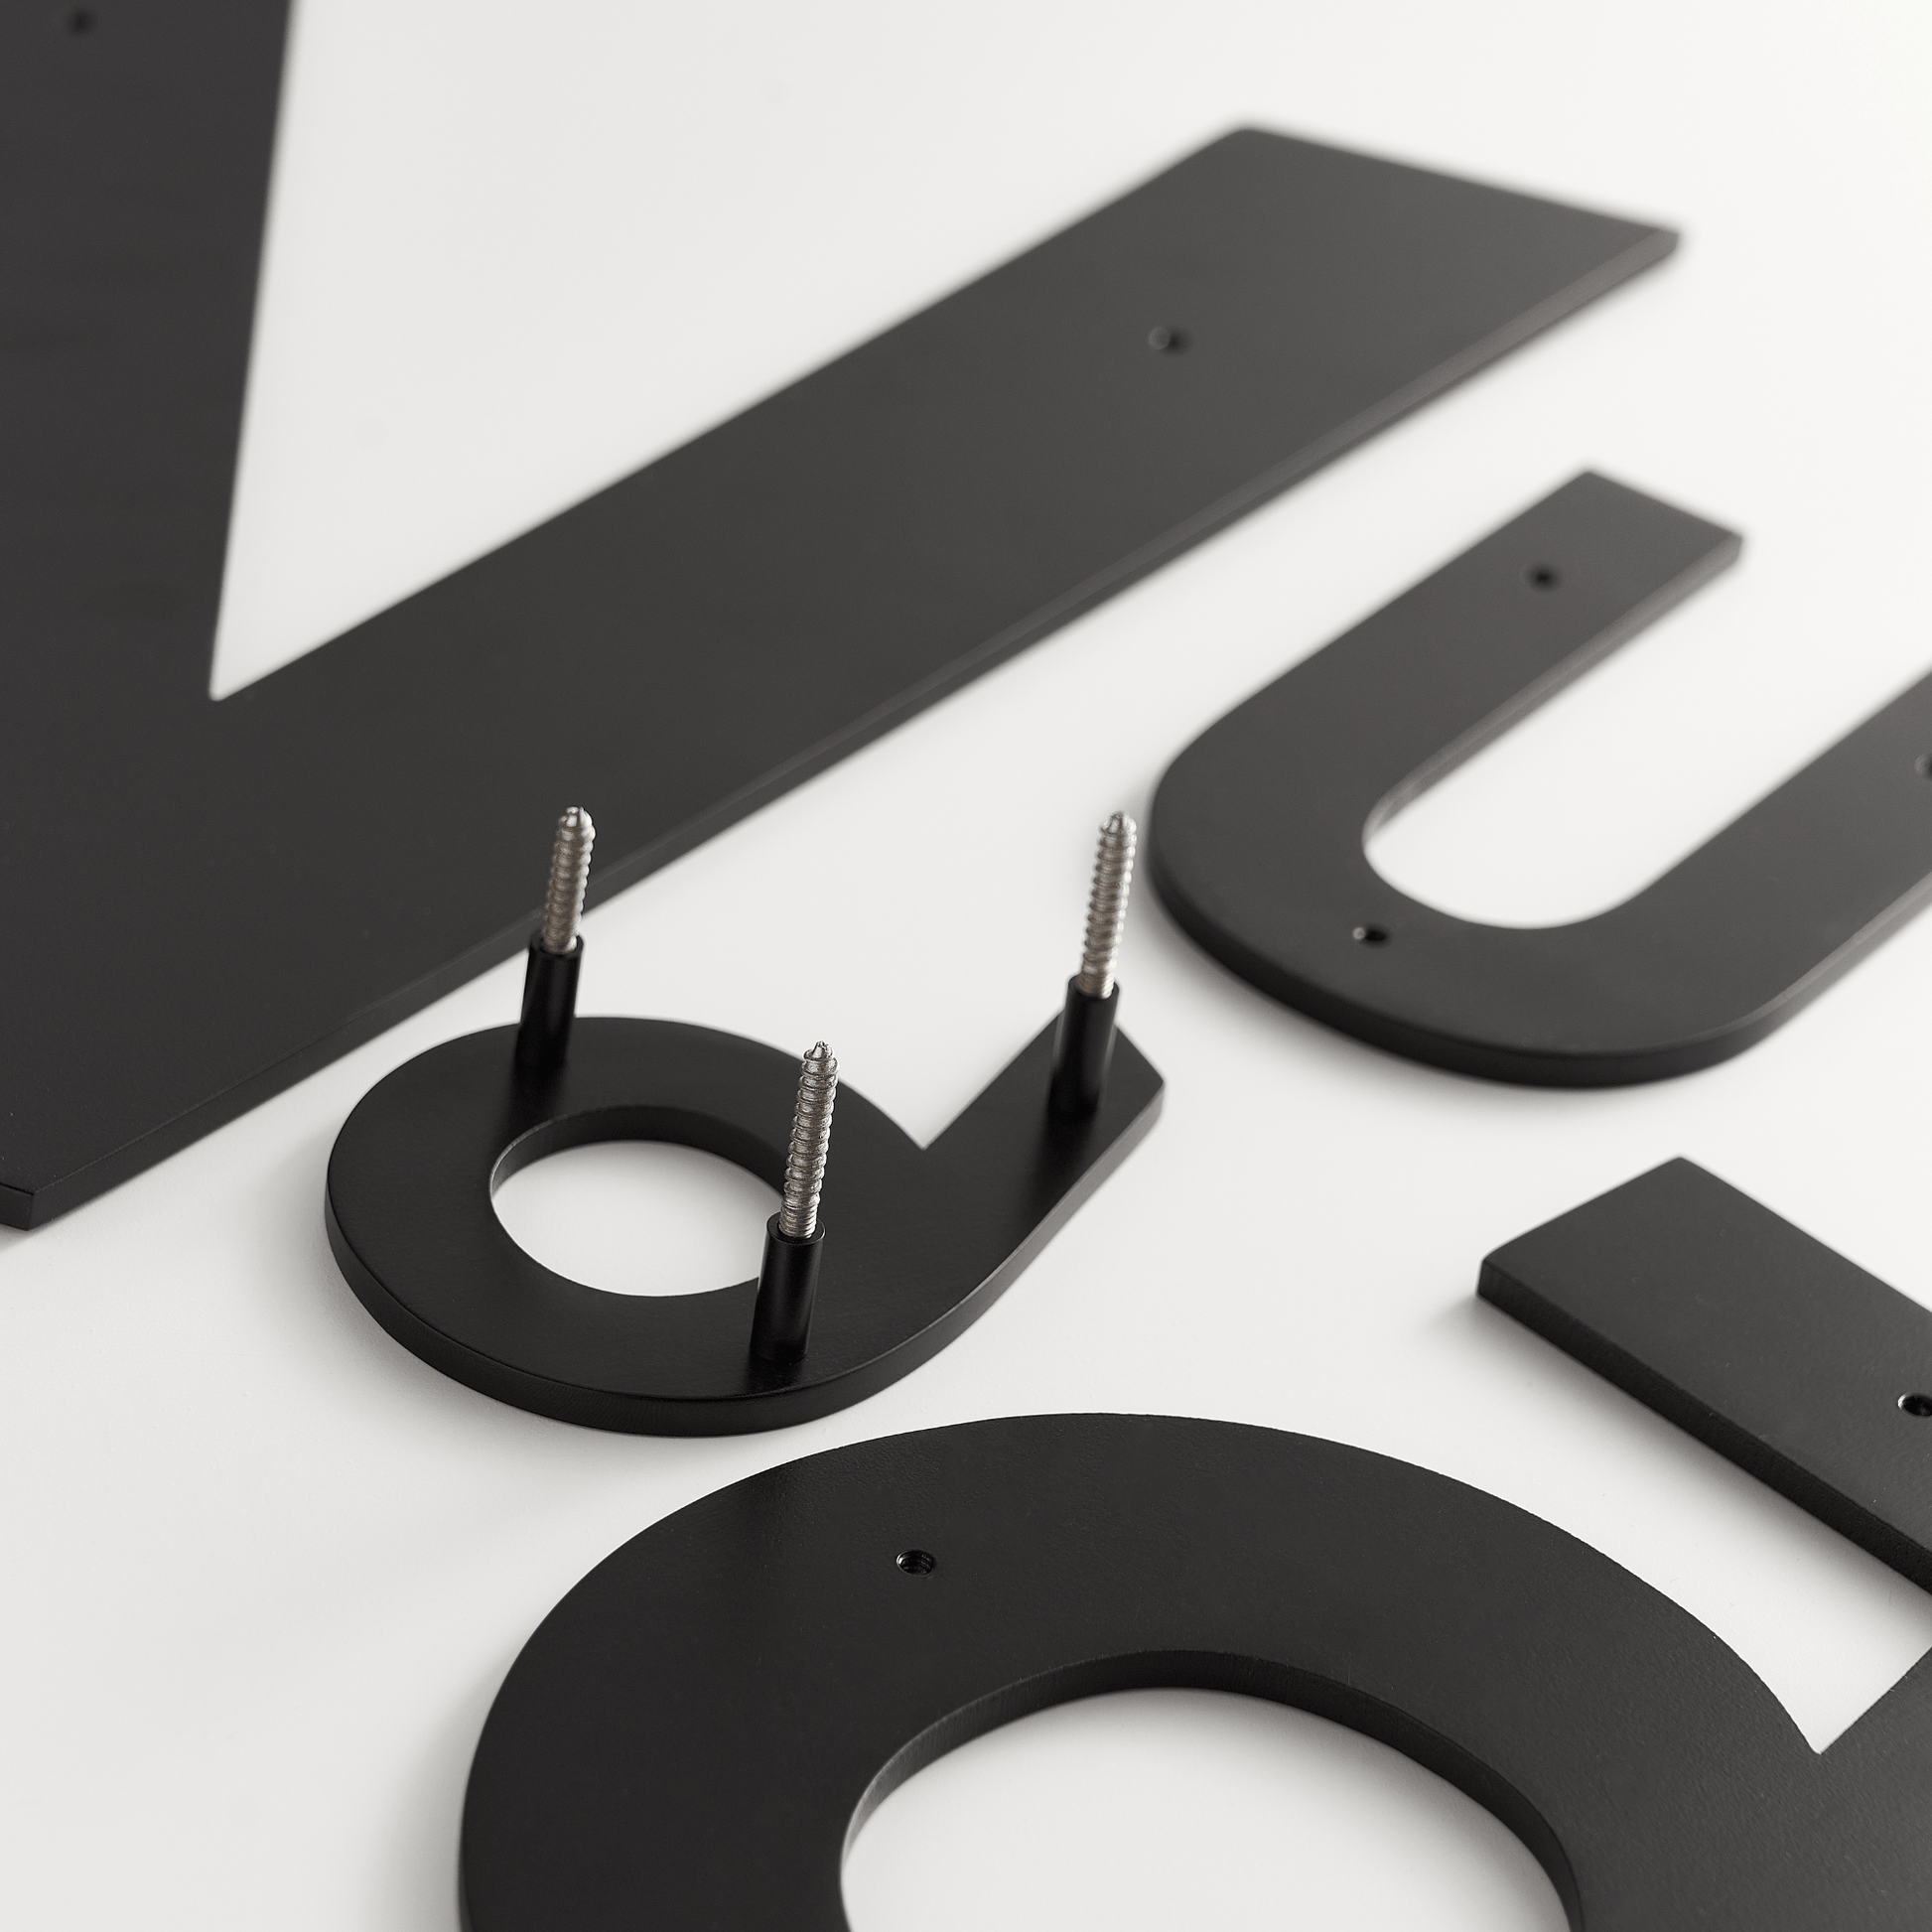 House Numbers and Letters Bayside Luxe Signage - Solid Black Floating House Numbers and Letters - Beaumaris Bay 10 cm